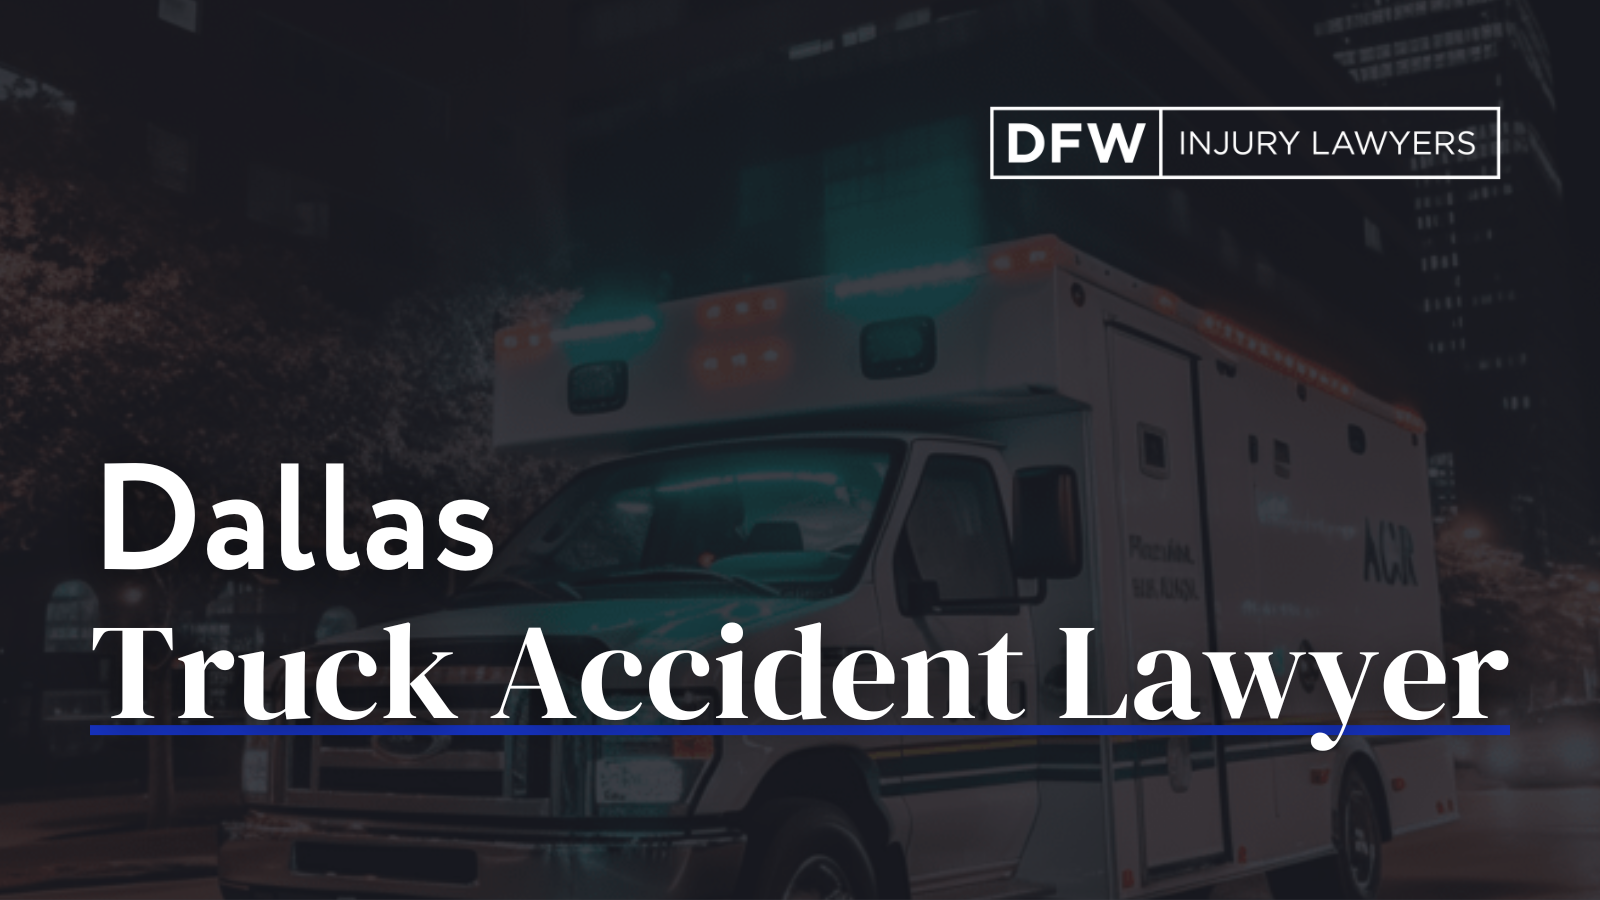 Dallas Truck Accident Lawyer - DFW